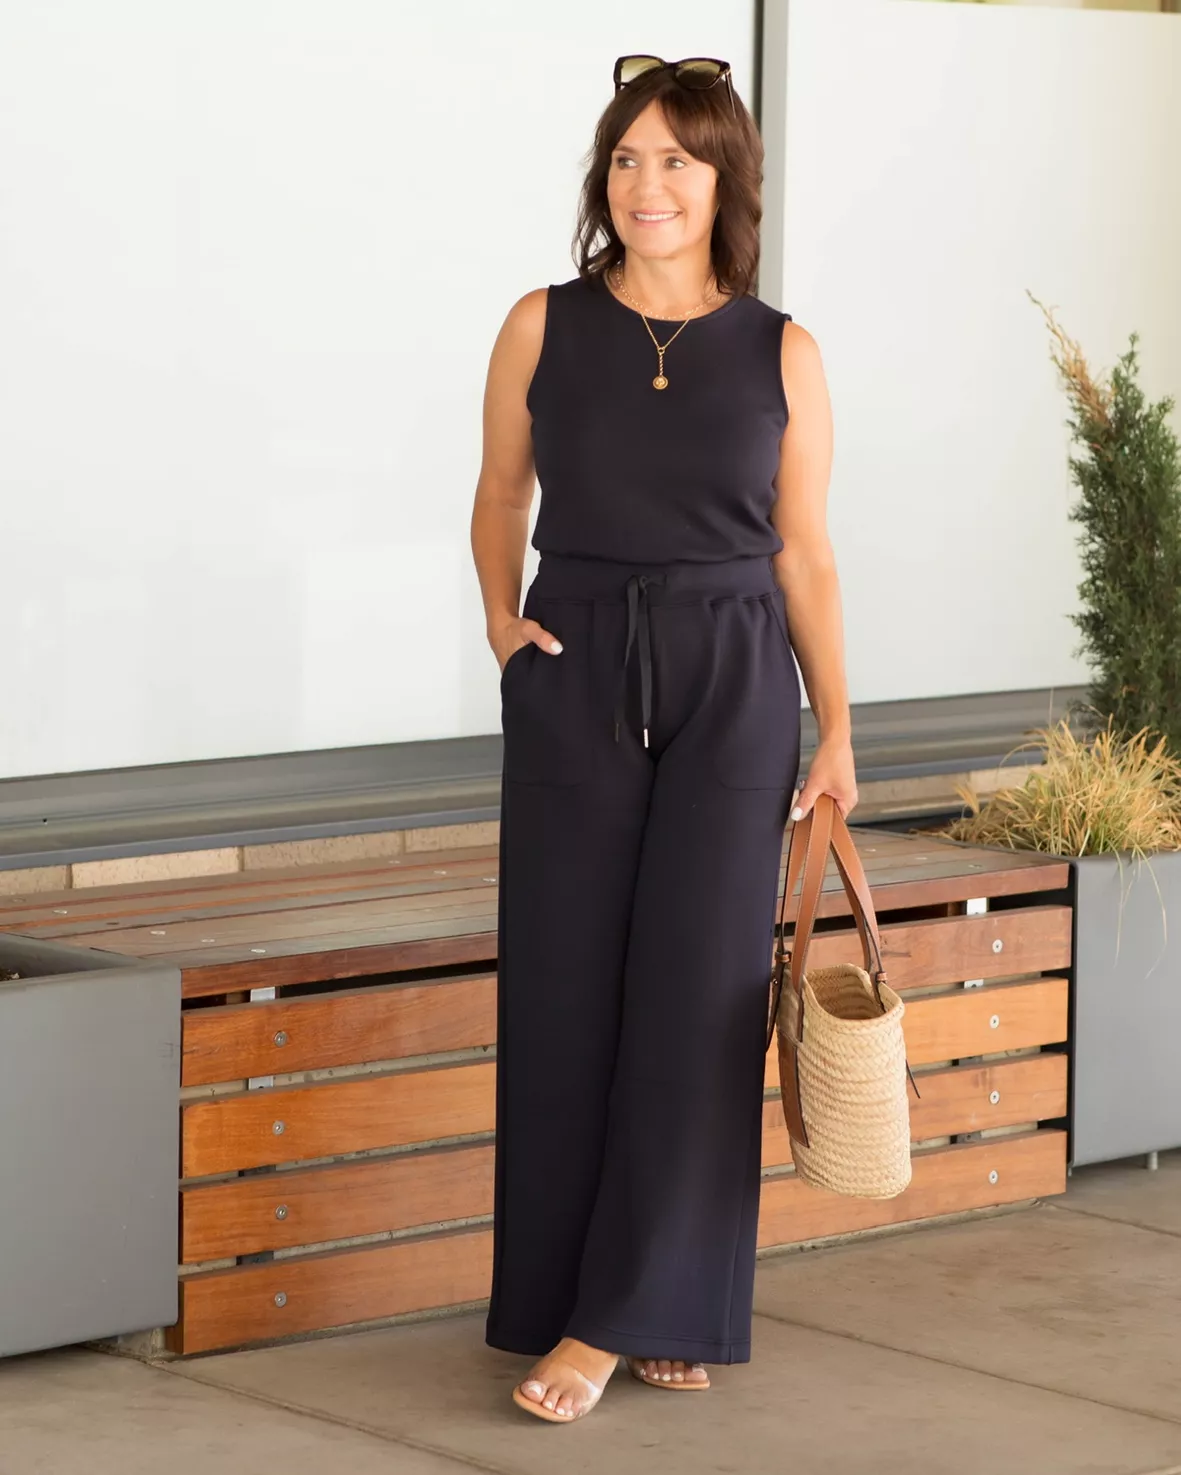 AirEssentials Jumpsuit - Effortless Style for Any Occasion